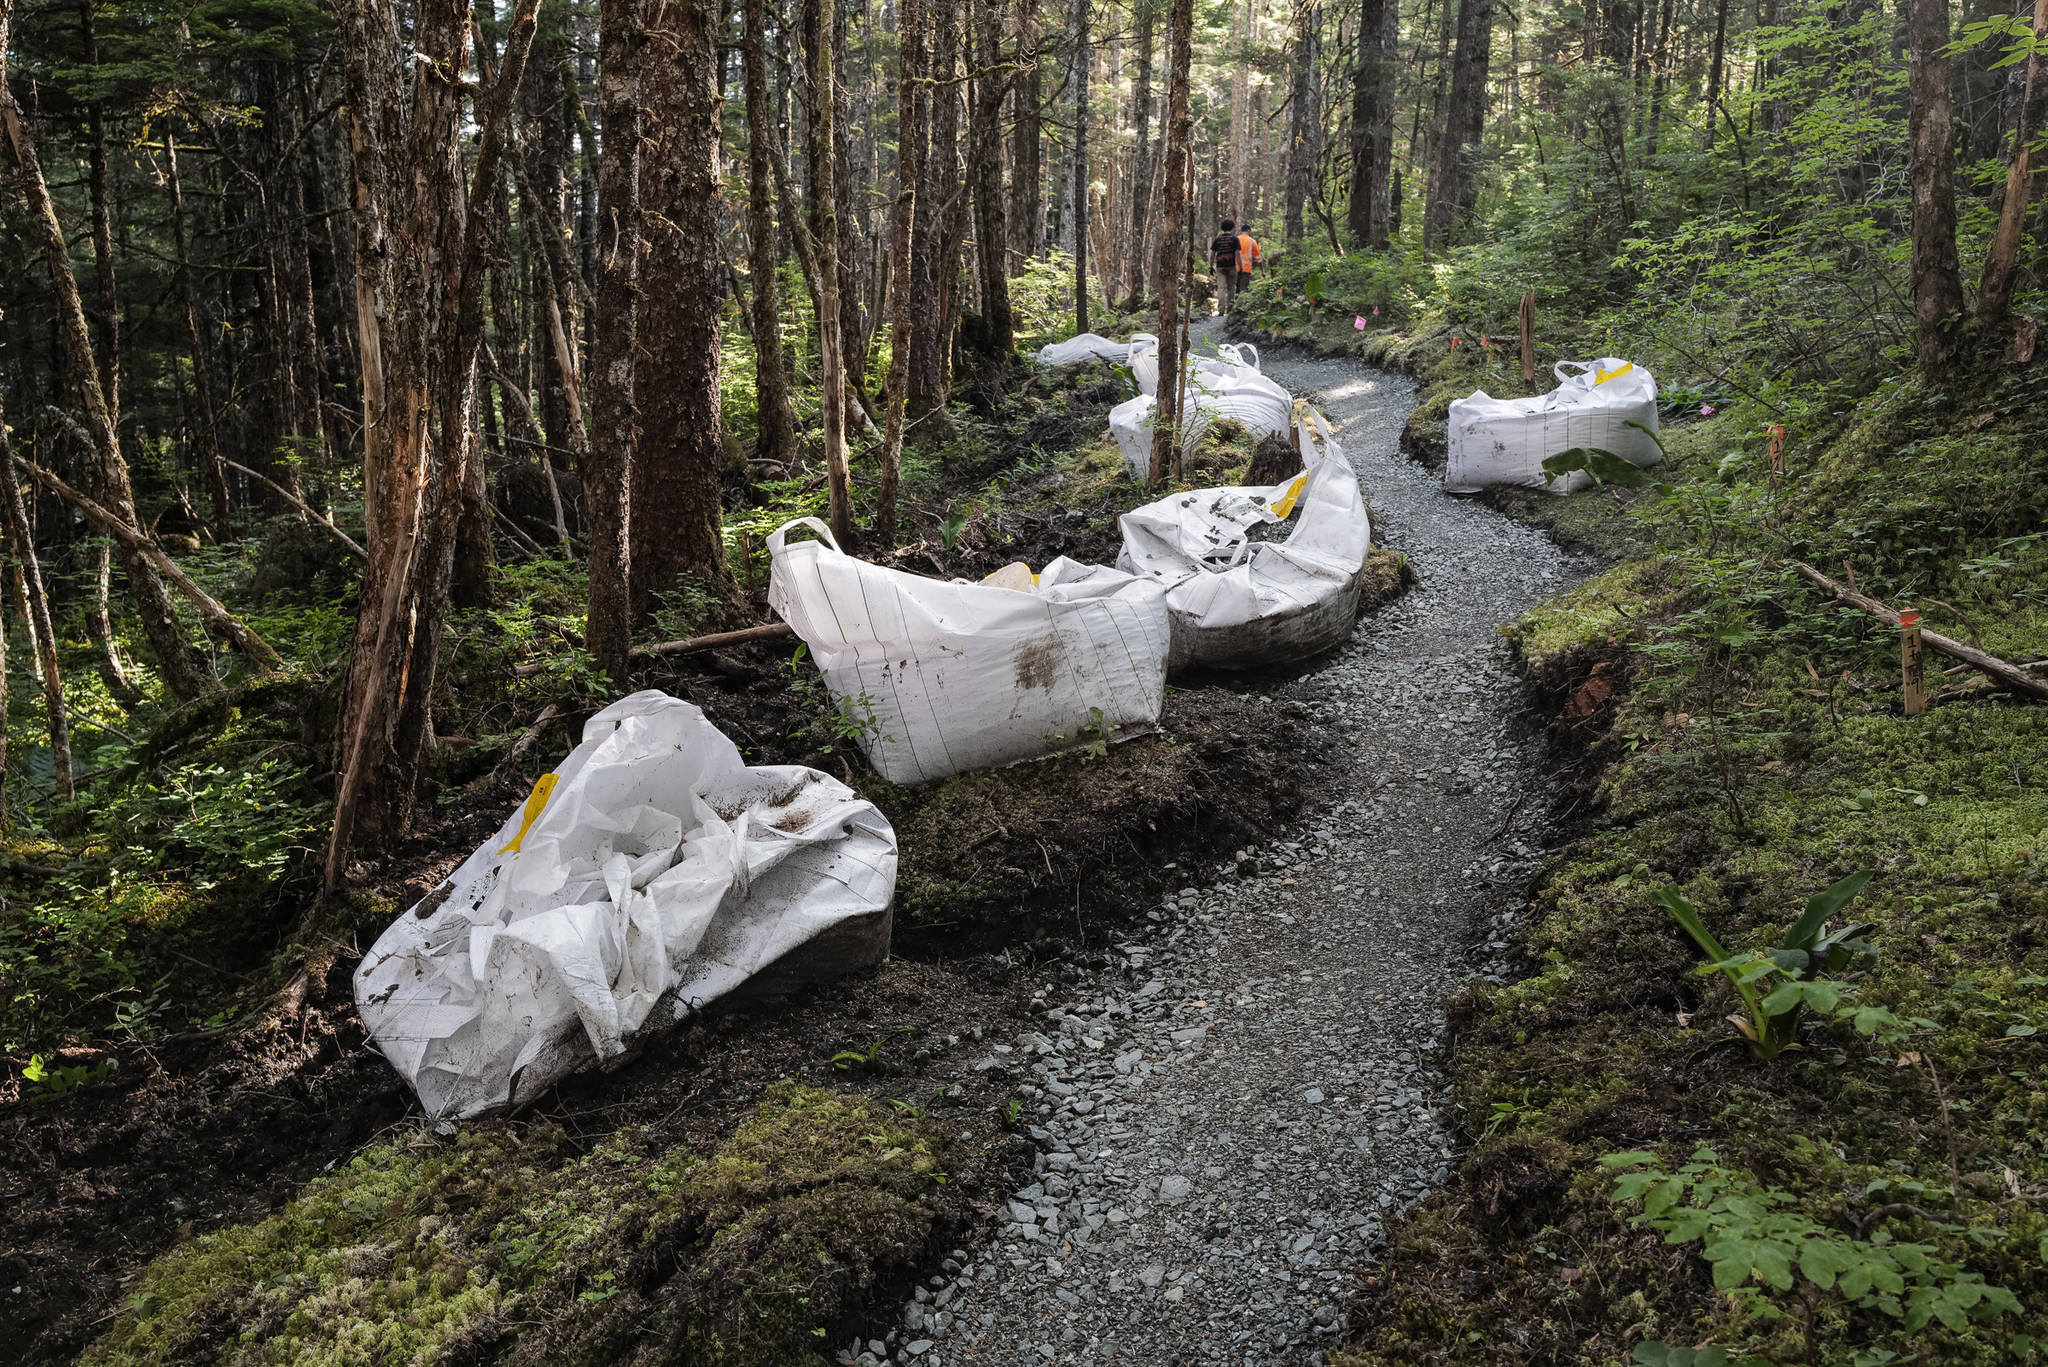 A new Treadwell Gorge reroute trail on the Treadwell Ditch Trail built by Trail Mix crew and volunteers on Thursday, Aug. 8, 2019. (Michael Penn | Juneau Empire)